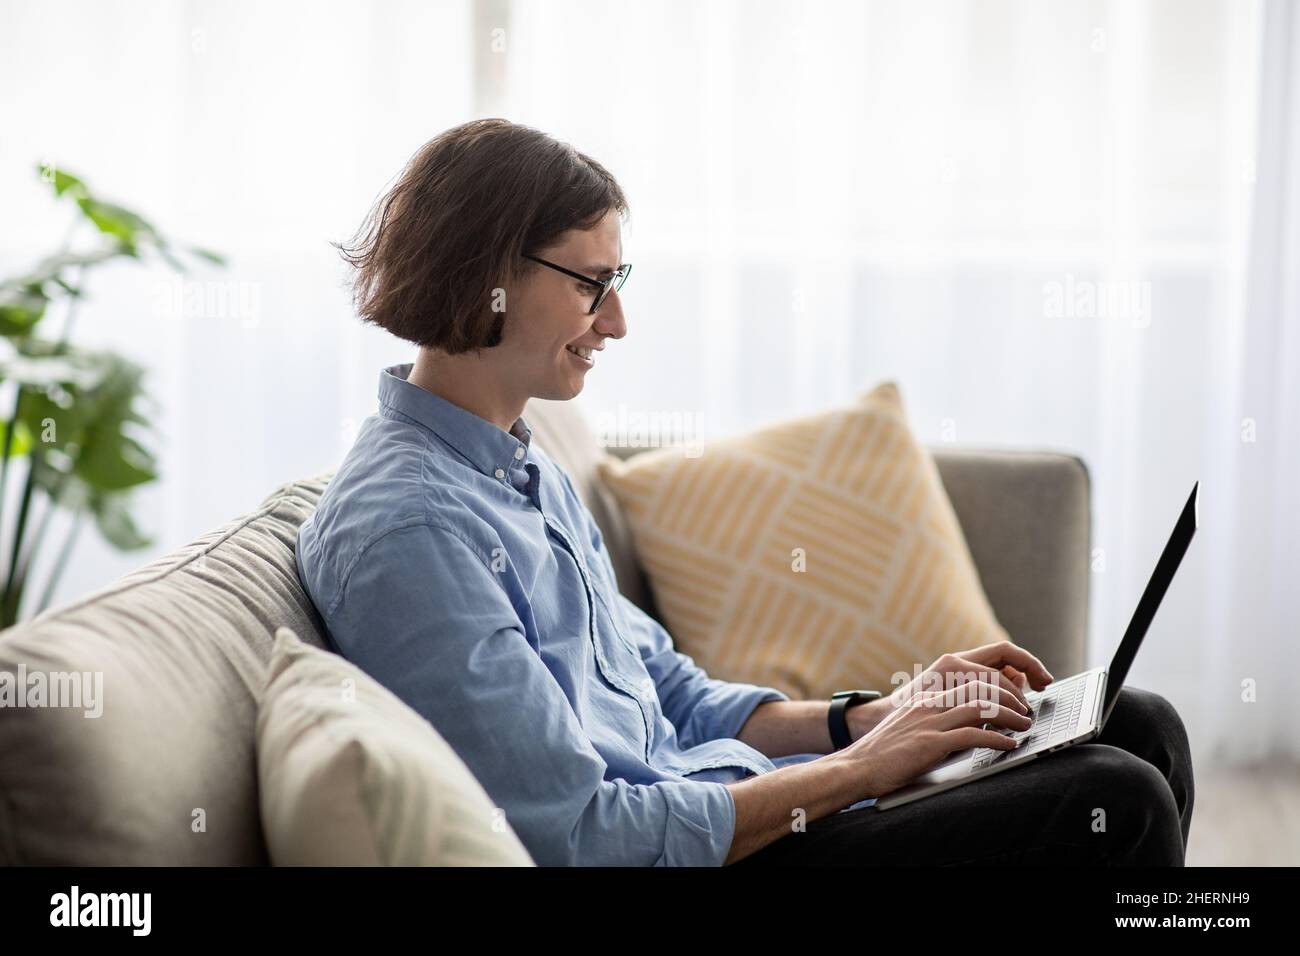 Handsome freelancer guy relaxing on sofa with laptop, enjoying domestic pastime and remote job opportunities, free space Stock Photo